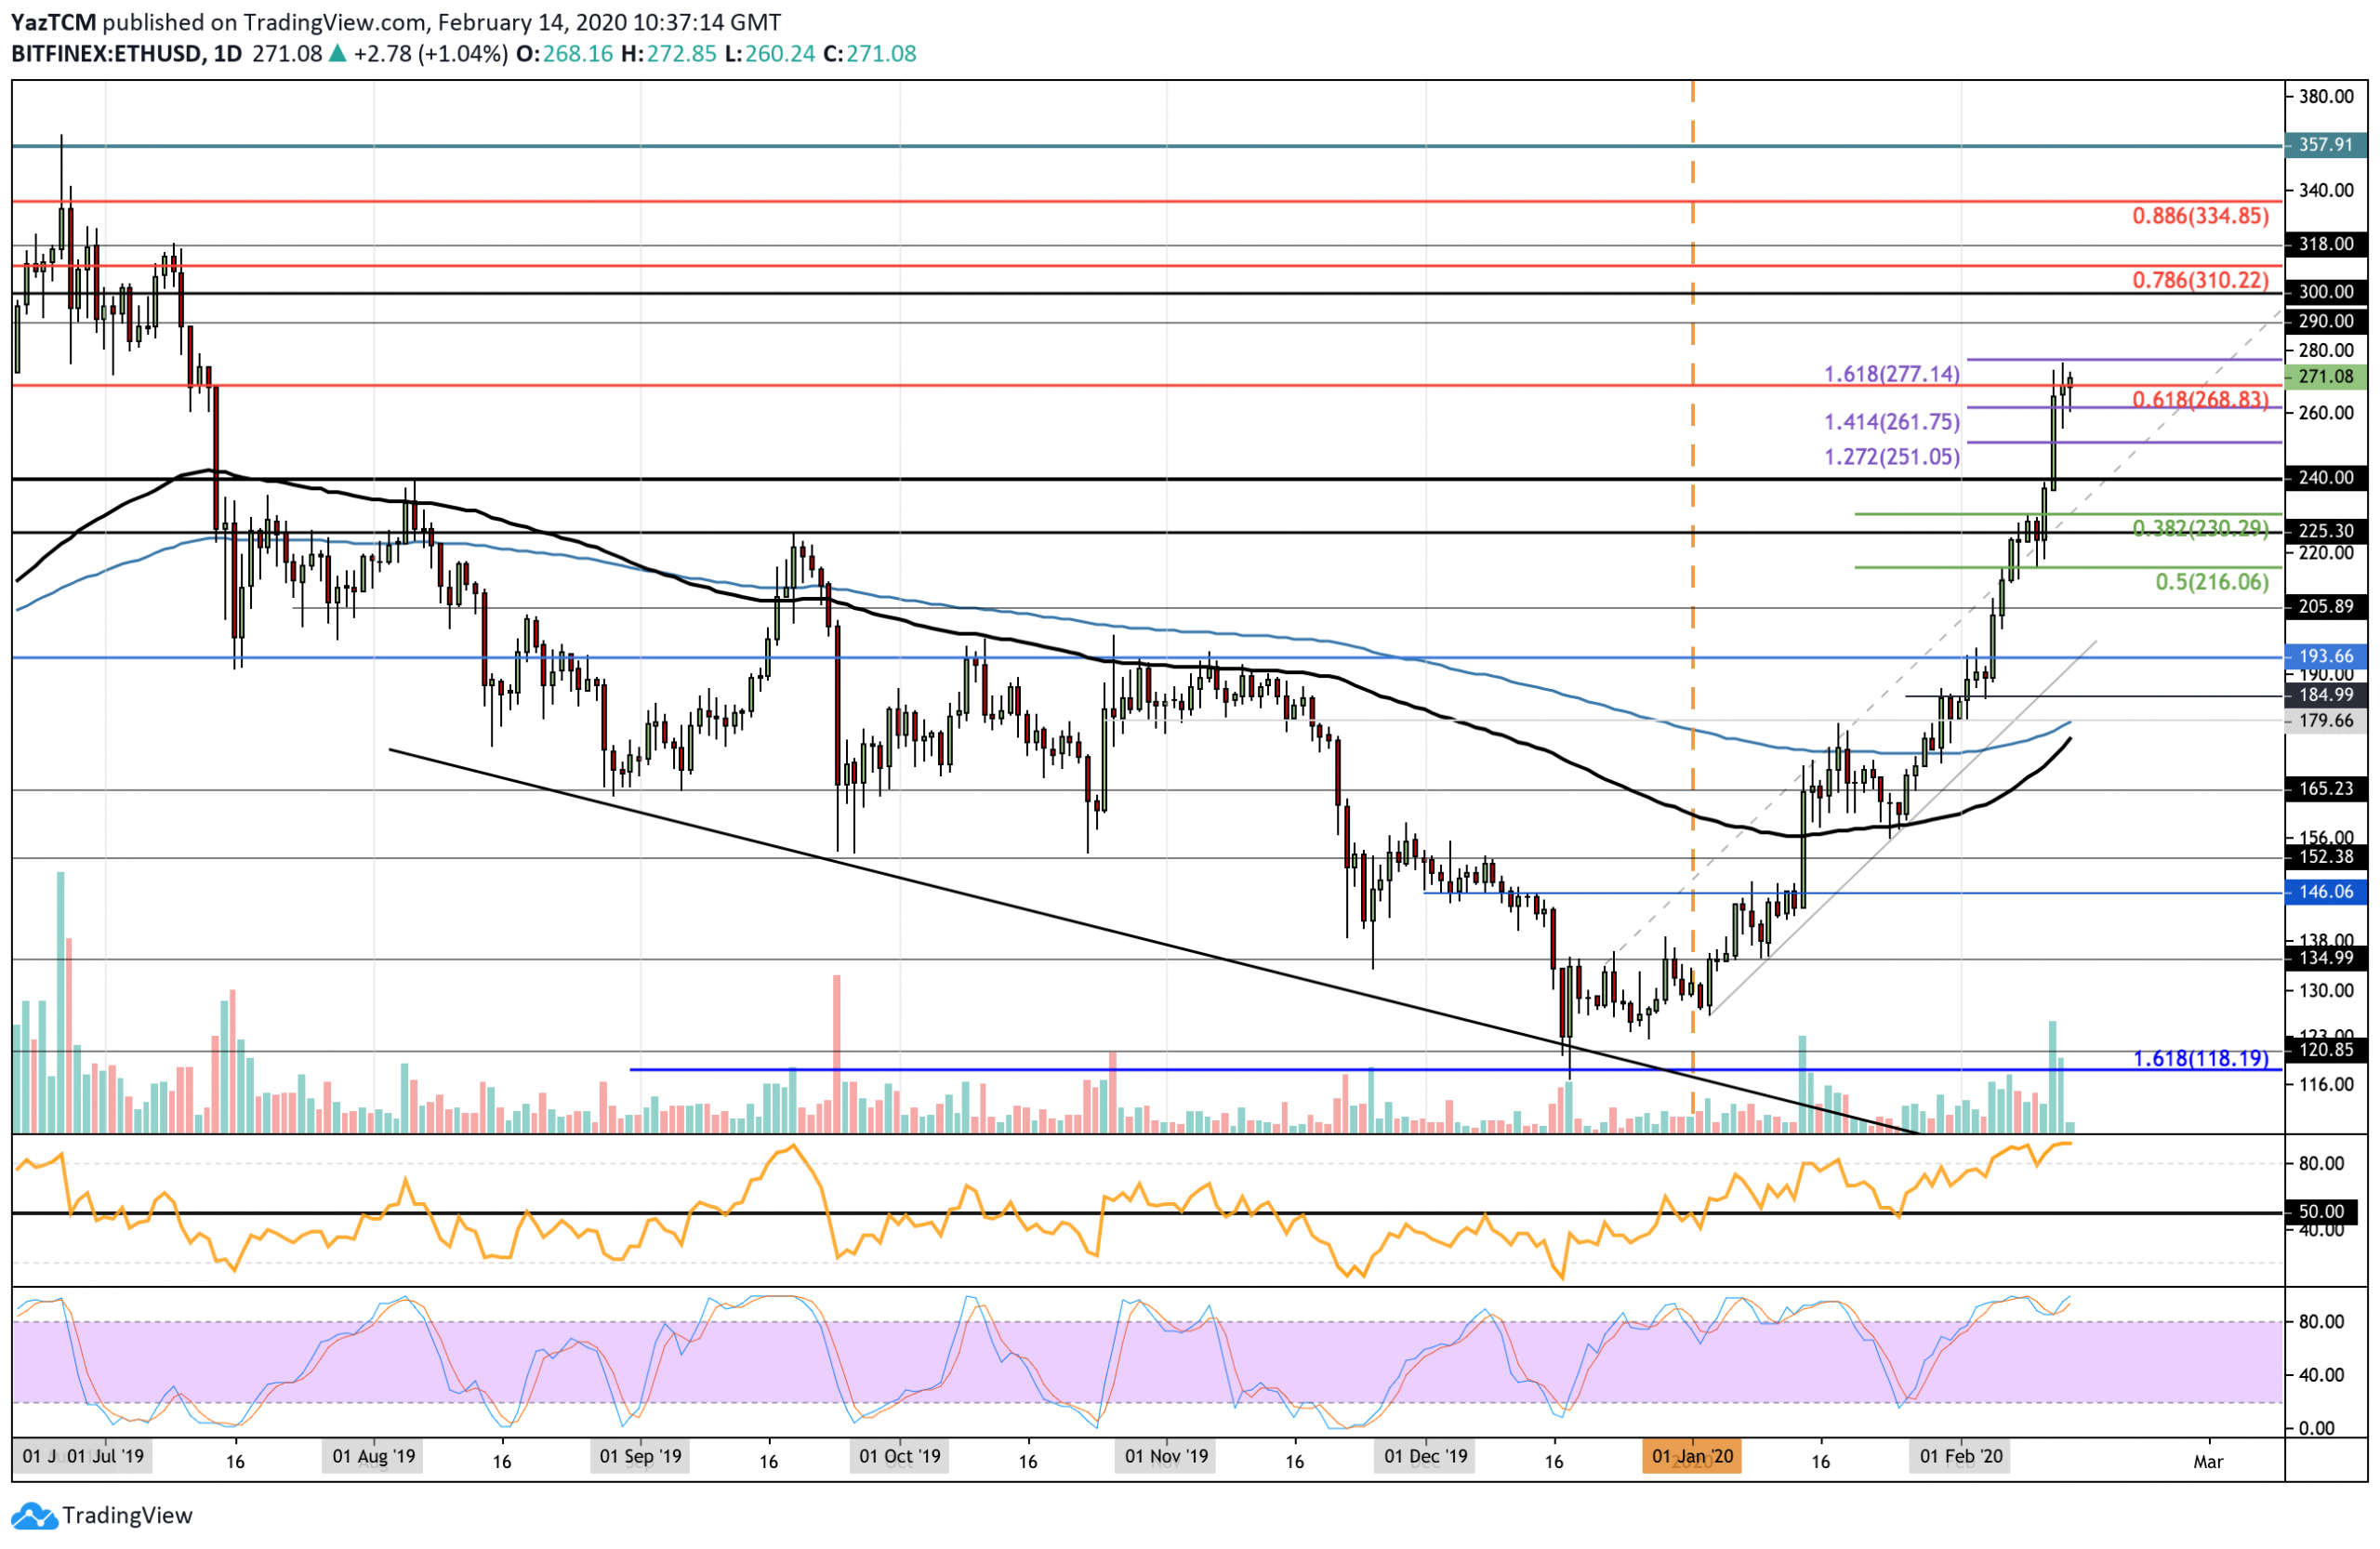 Crypto Price Analysis & Overview February 14th: Bitcoin, Ethereum, Ripple, Litecoin, and EOS.